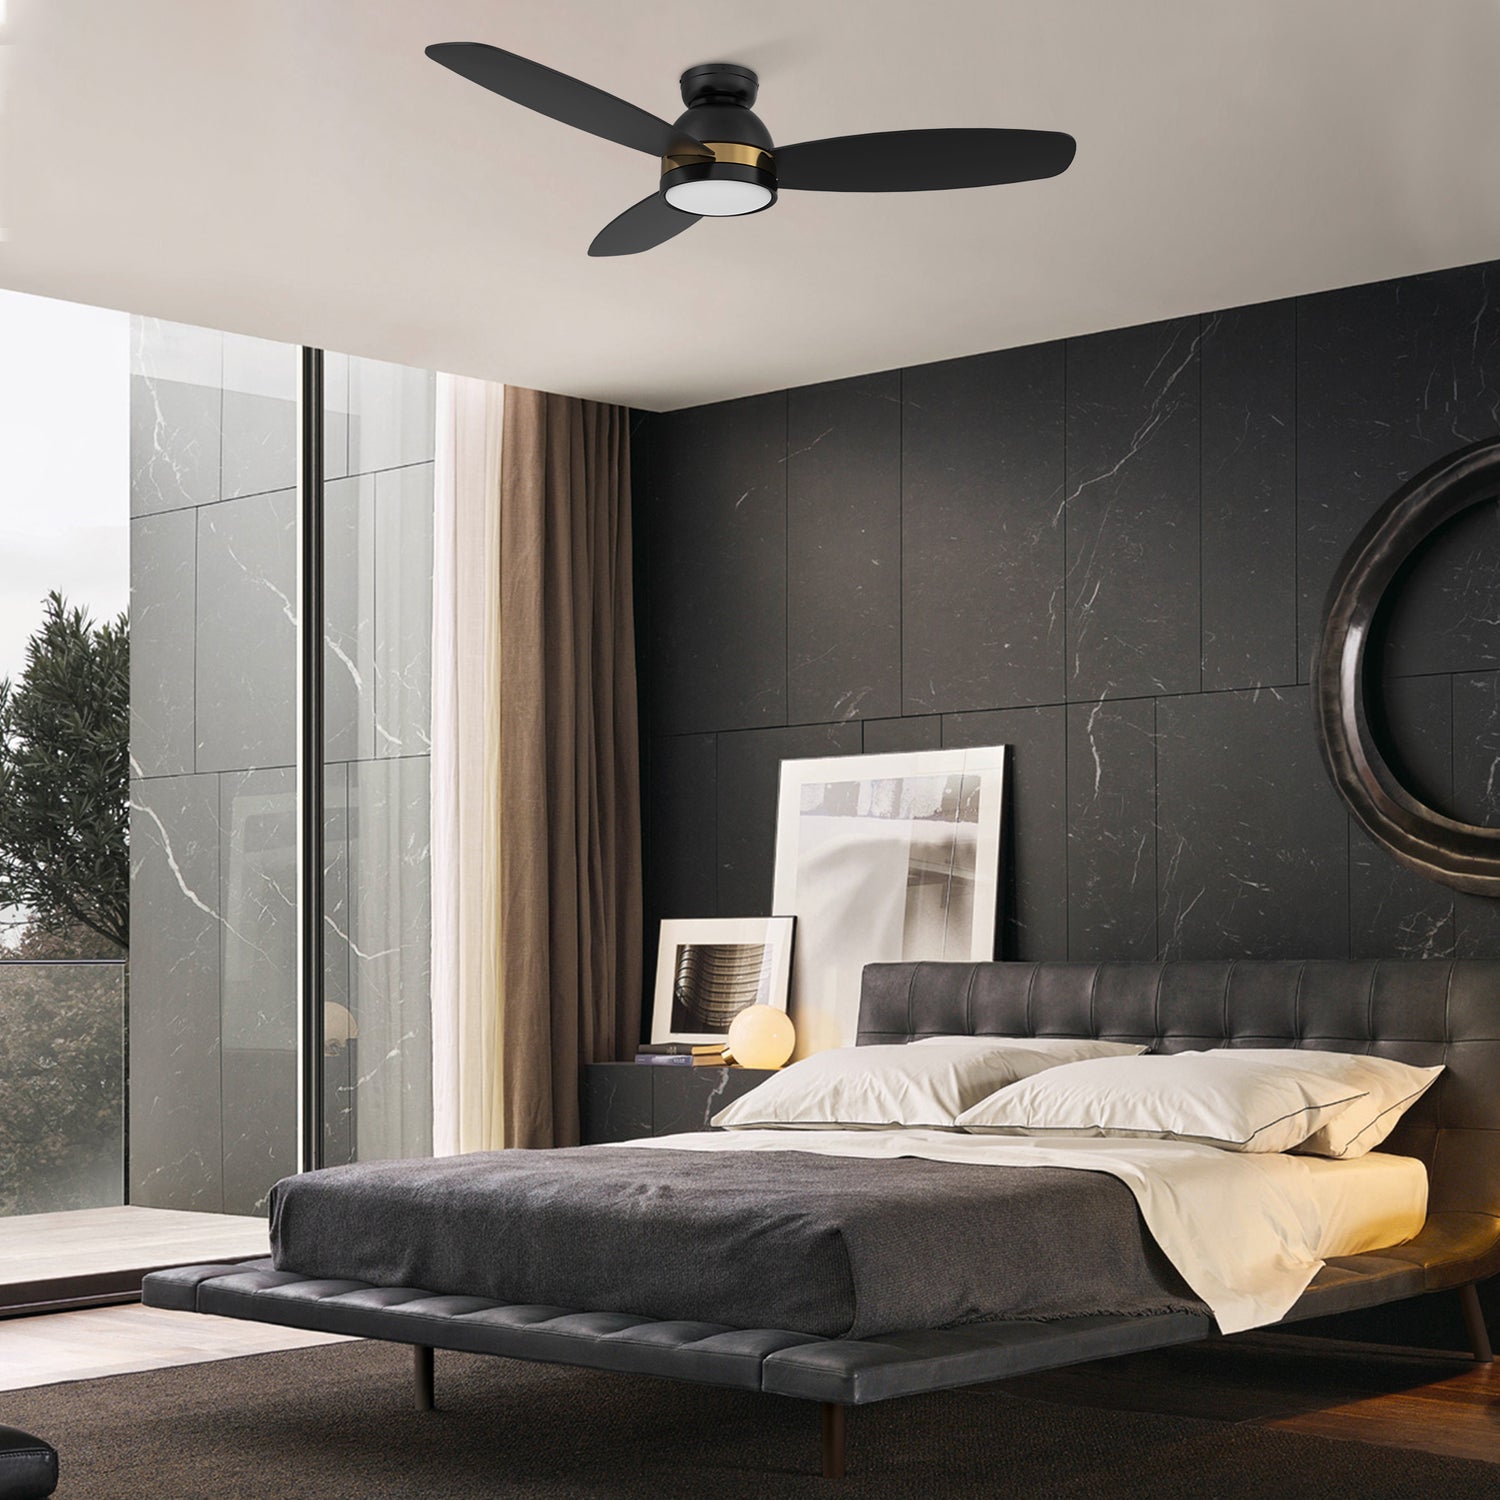 The Transform your home into a space of ultimate relaxation and comfort with the Smafan Biscay smart ceiling fan. The fan features a modern exterior with a sleek metal motor hub, elegantly burnished blades, and bold accents to blend seamlessly into contemporary décor. The fan’s interior is equipped with state-of-the-art motor and lighting equipment to create a comfortable environment in any space. Select from a crisp white finish for minimalist spaces or a bold black finish for modern spaces. 